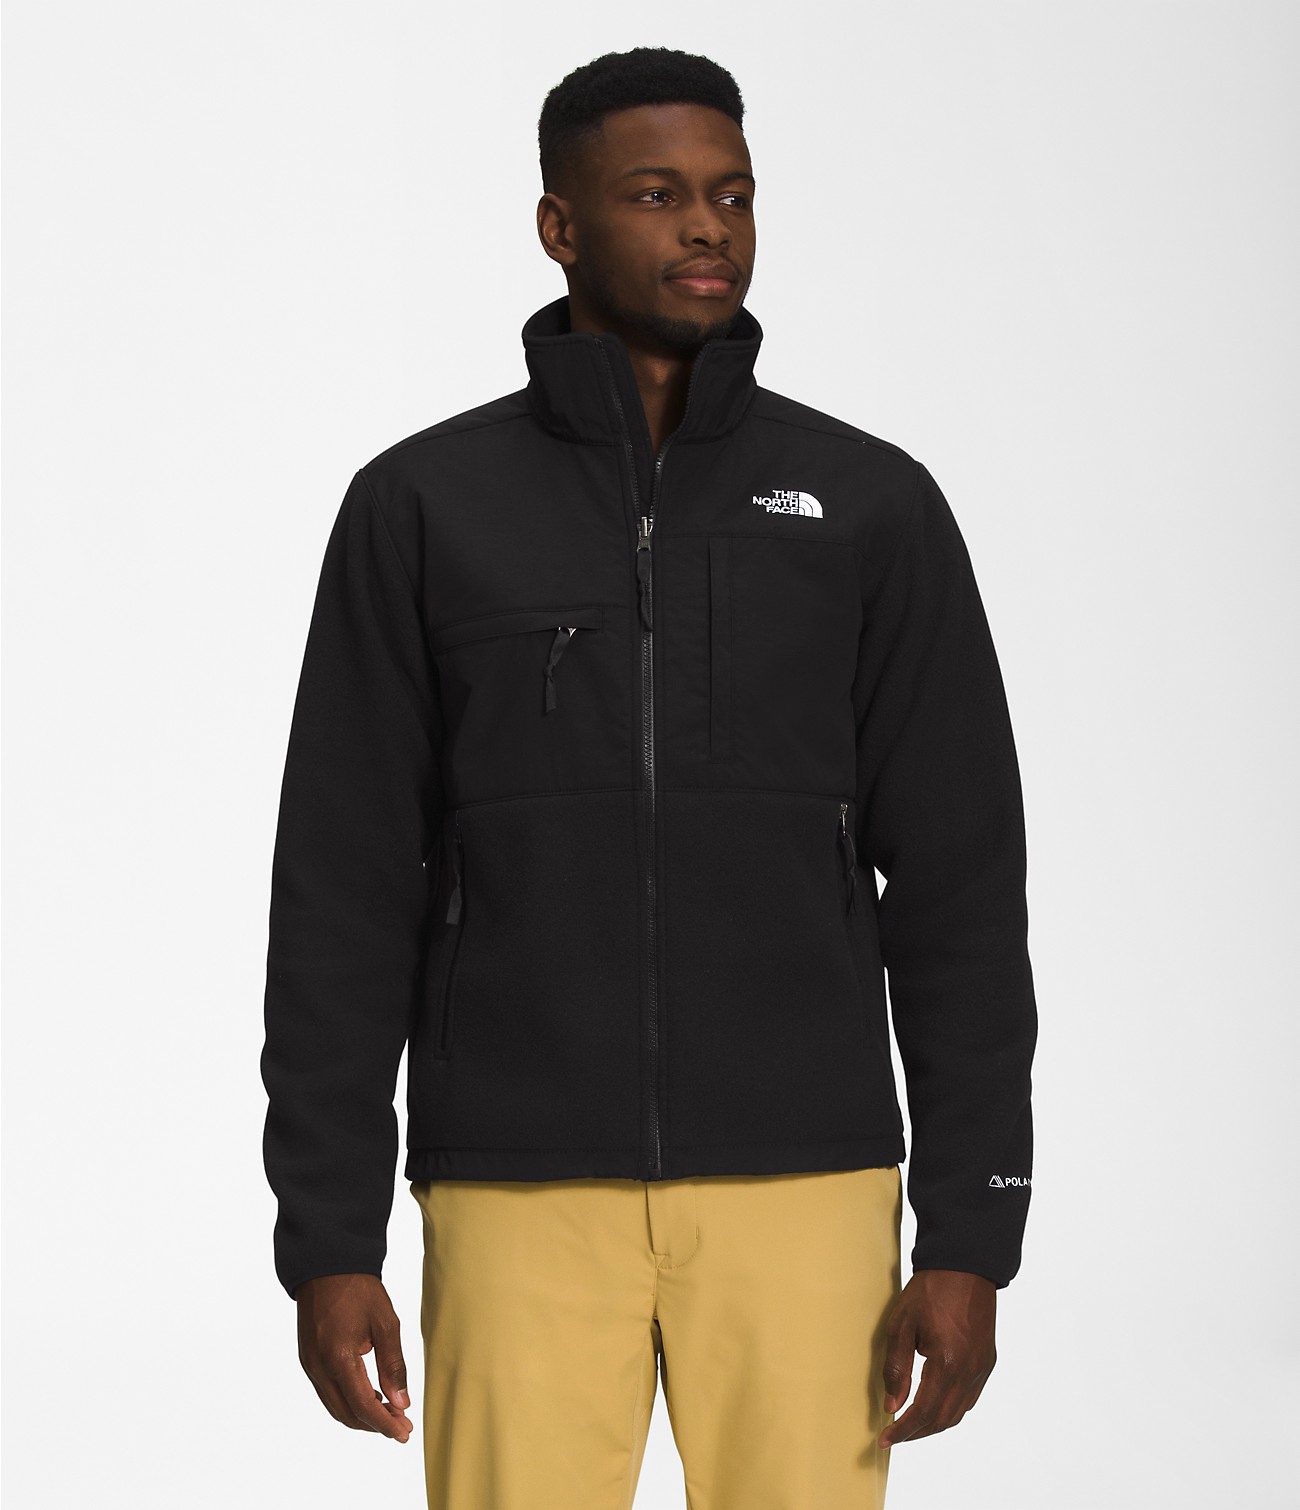 Unlock Wilderness' choice in the KÜHL Vs North Face comparison, the Denali Jacket by The North Face